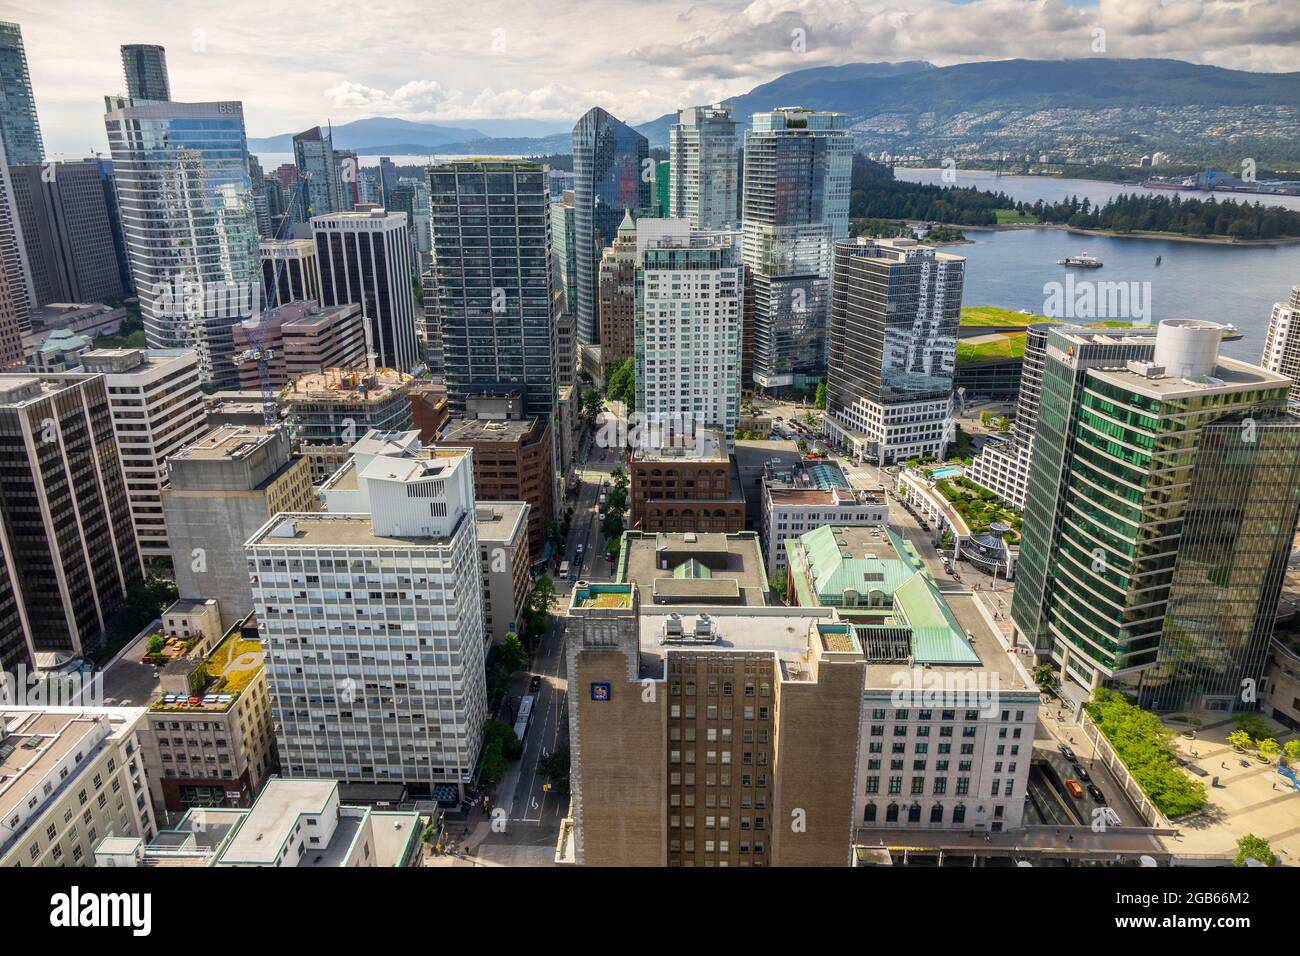 Downtown Vancouver British Columbia Aerial Skyscrapers Vancouver Canada ...